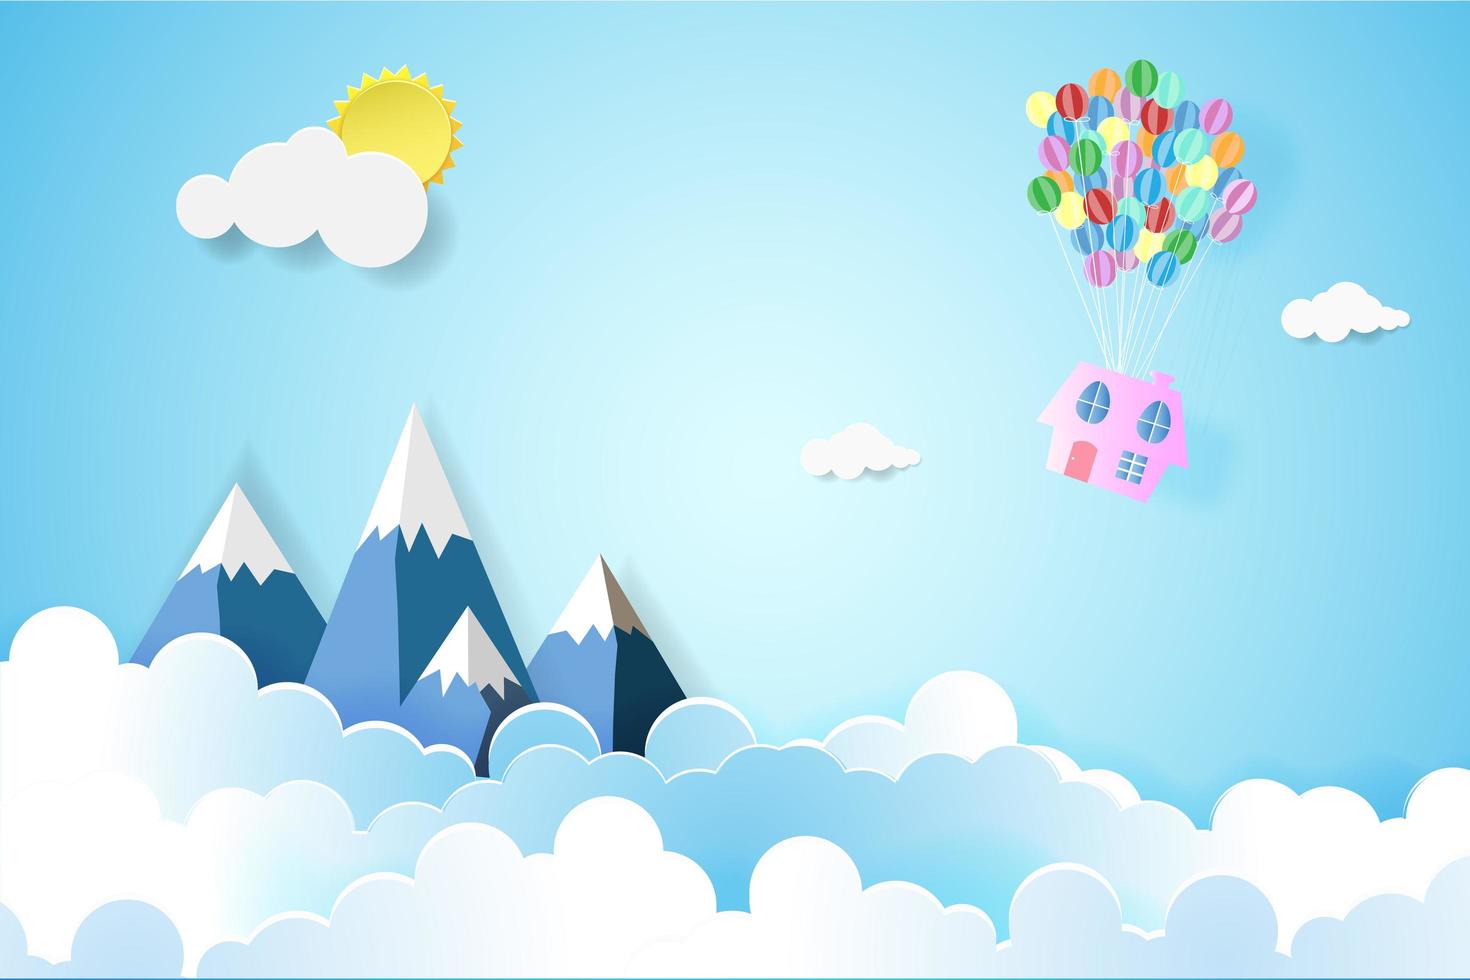 Balloon floating in the sky vector